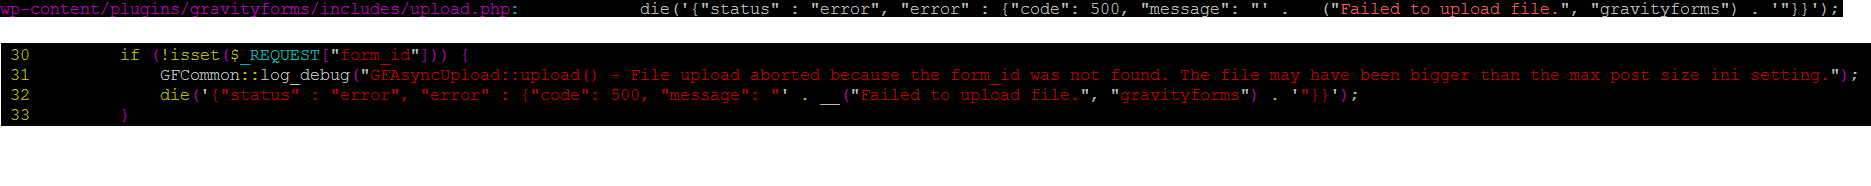 failed-upload-from